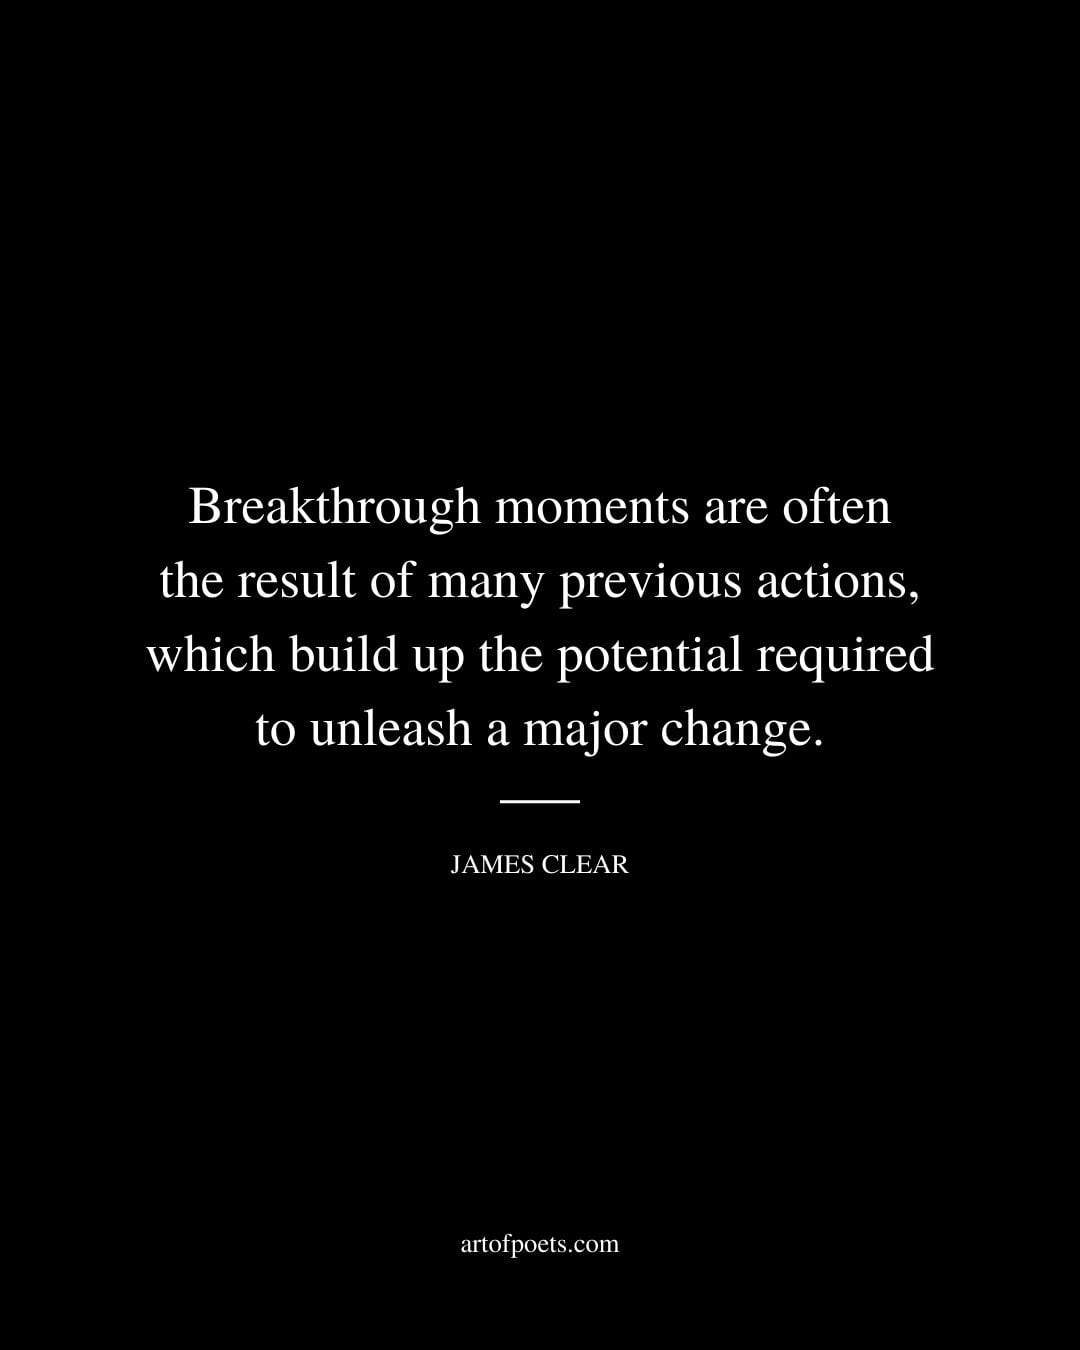 Breakthrough moments are often the result of many previous actions which build up the potential required to unleash a major change